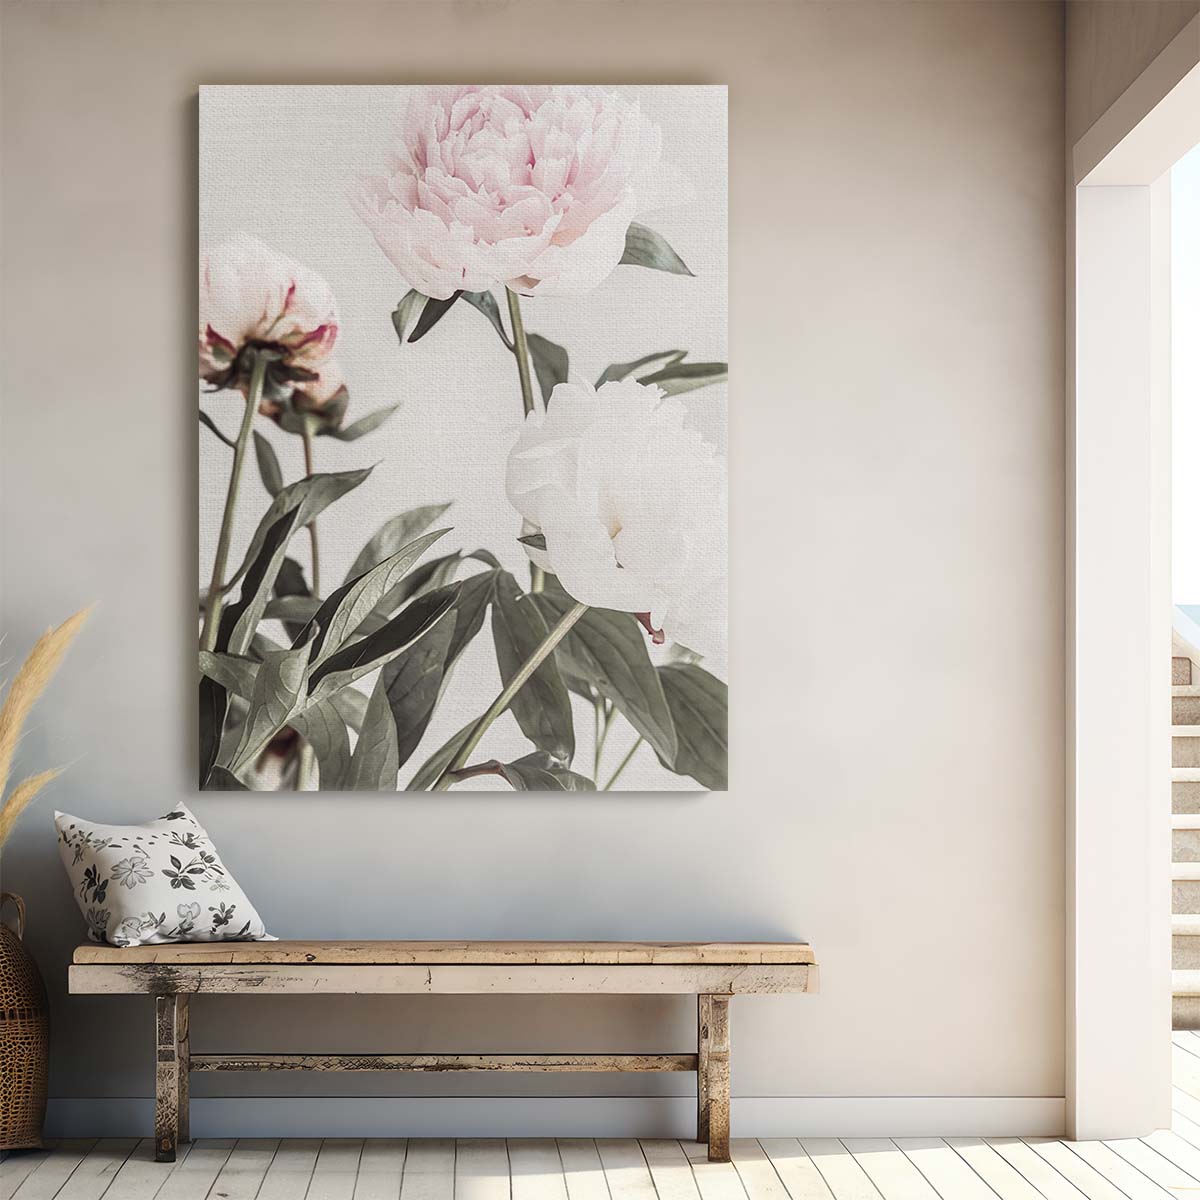 Botanical Peony Flowers Photography White & Pink Floral Still Life by Luxuriance Designs, made in USA